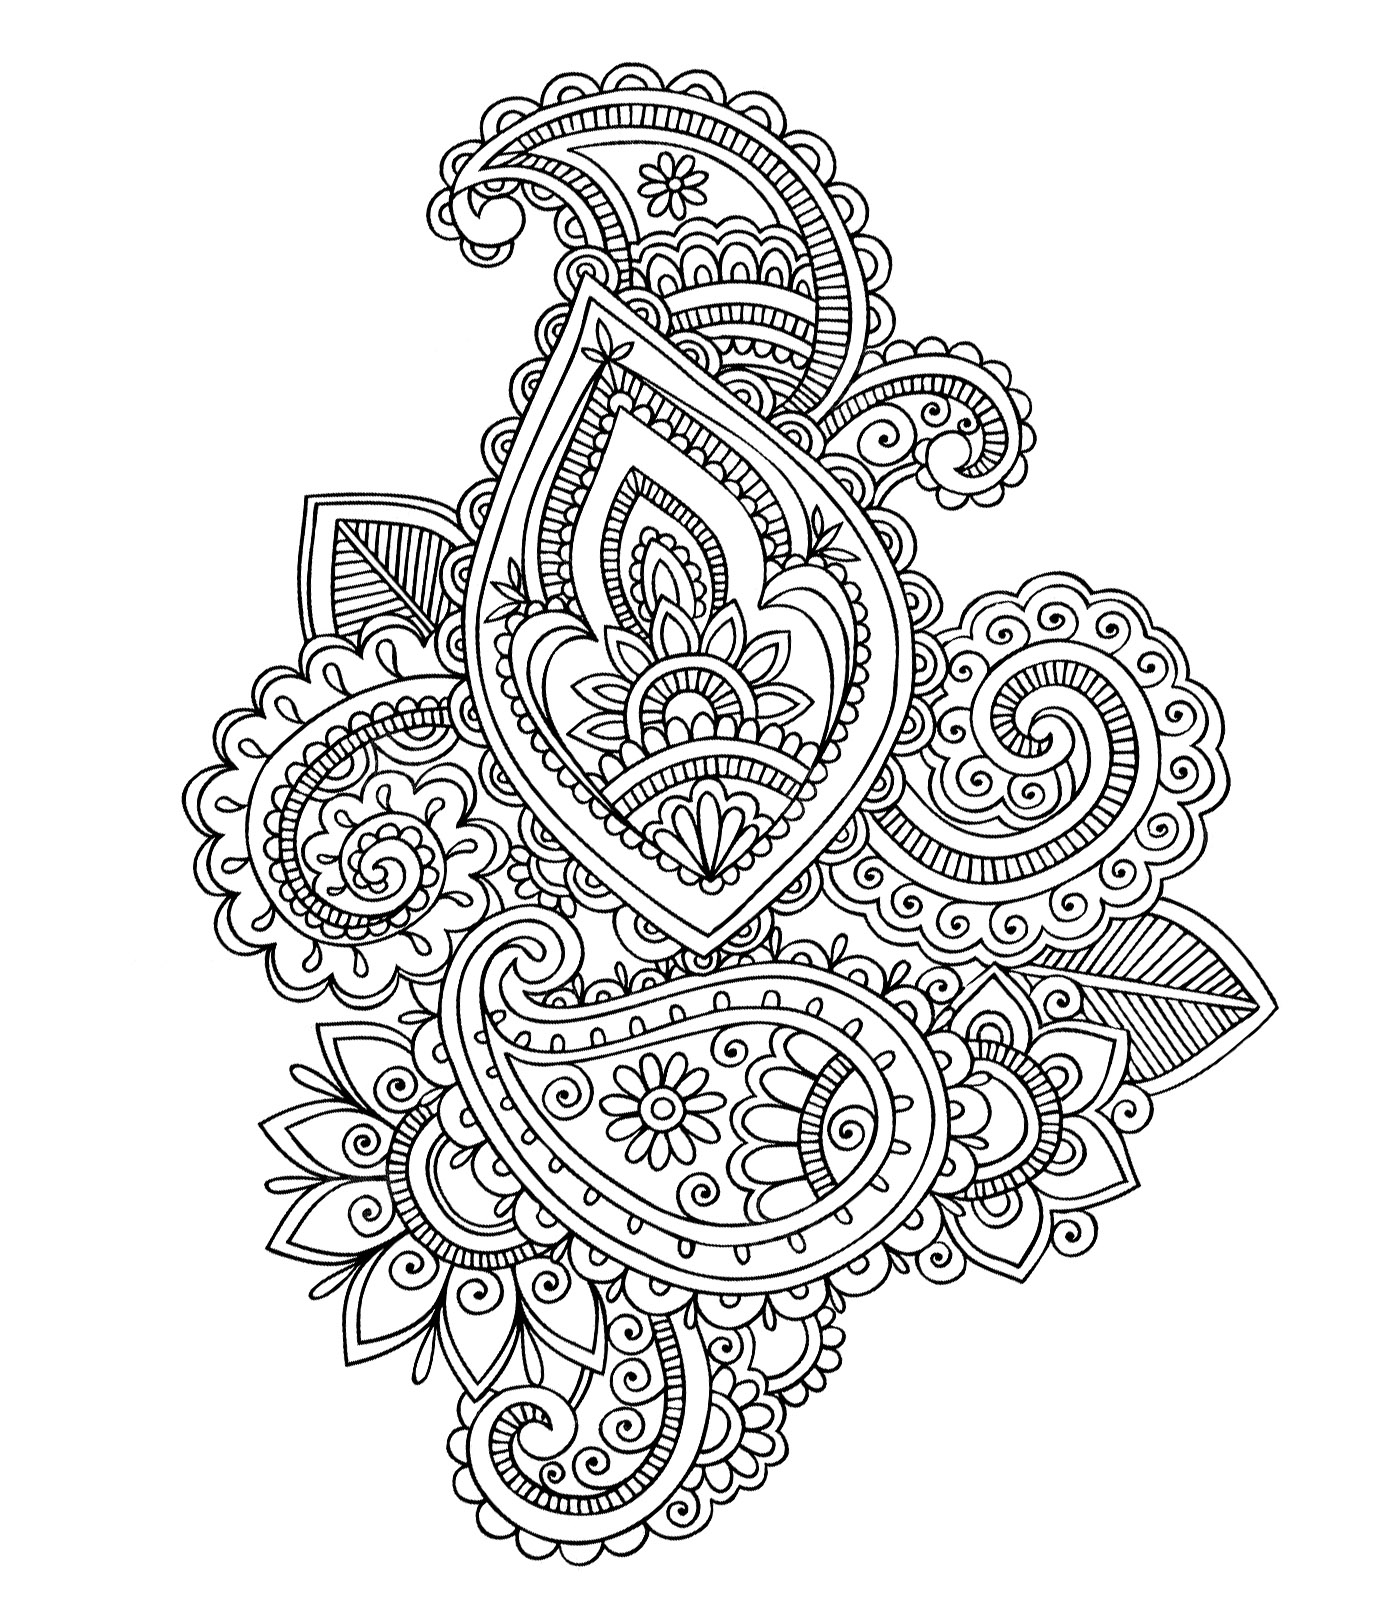 Paisley cashemire - Oriental Adult Coloring Pages - Page coloring-oriental/